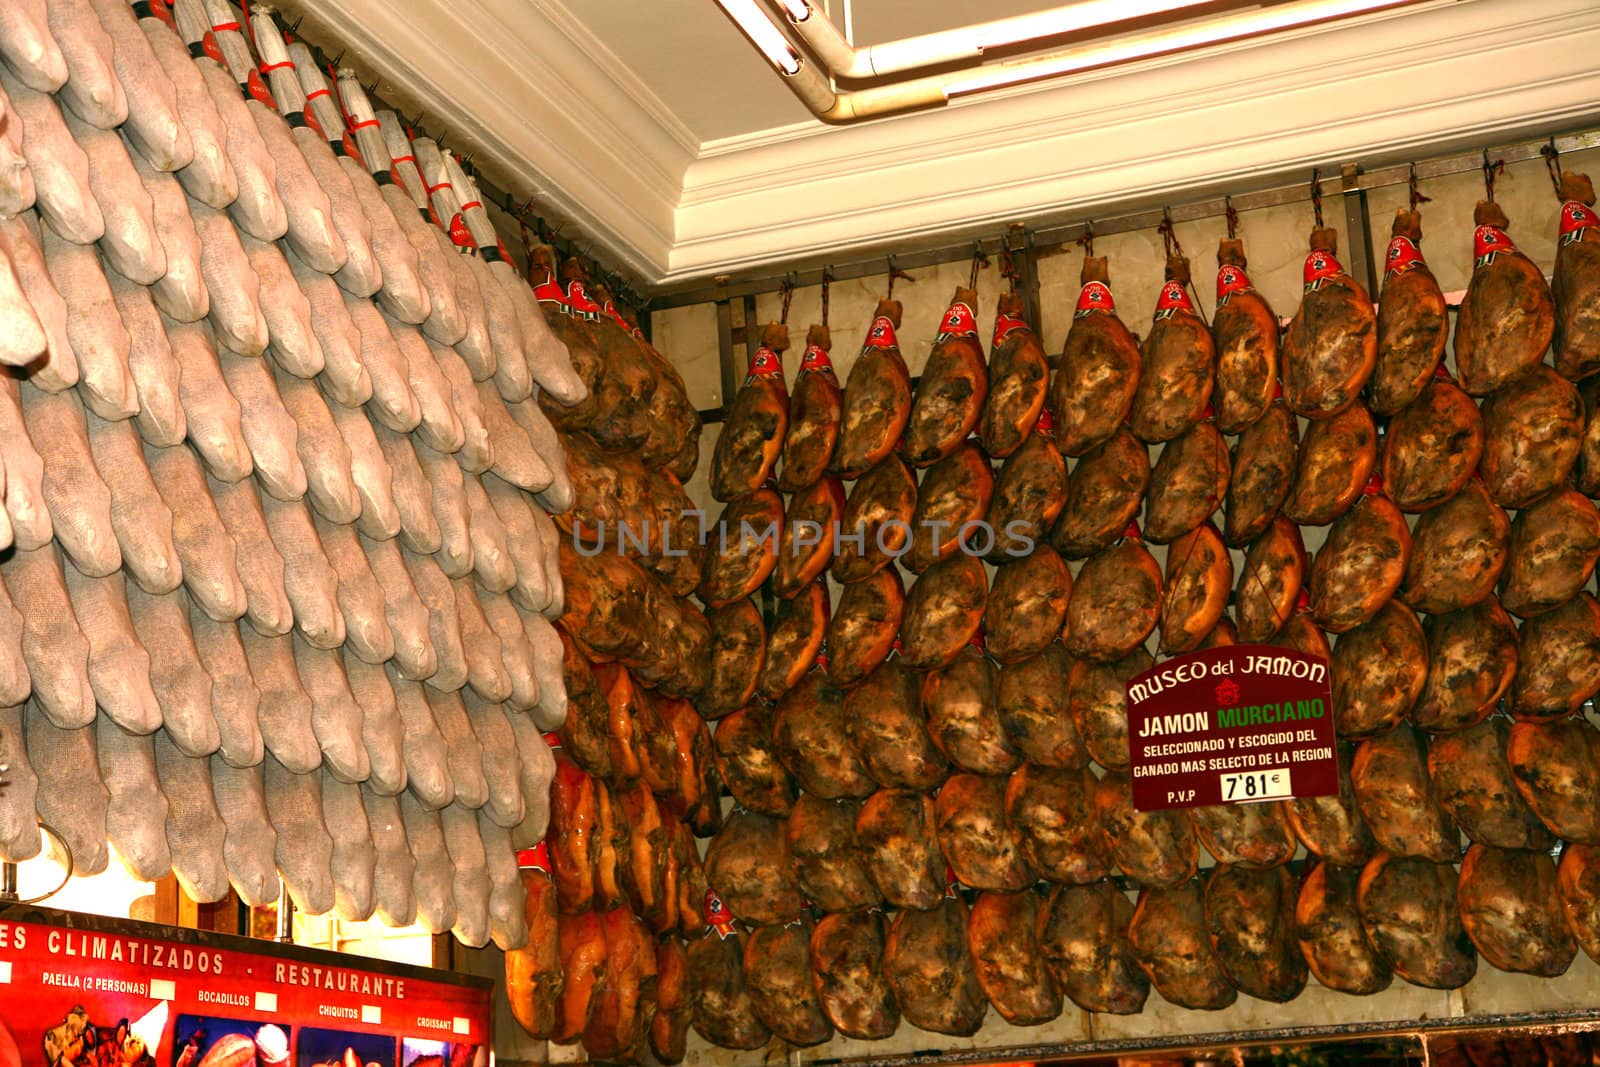 Huge assortment of spanish jamon at various price and quality points.